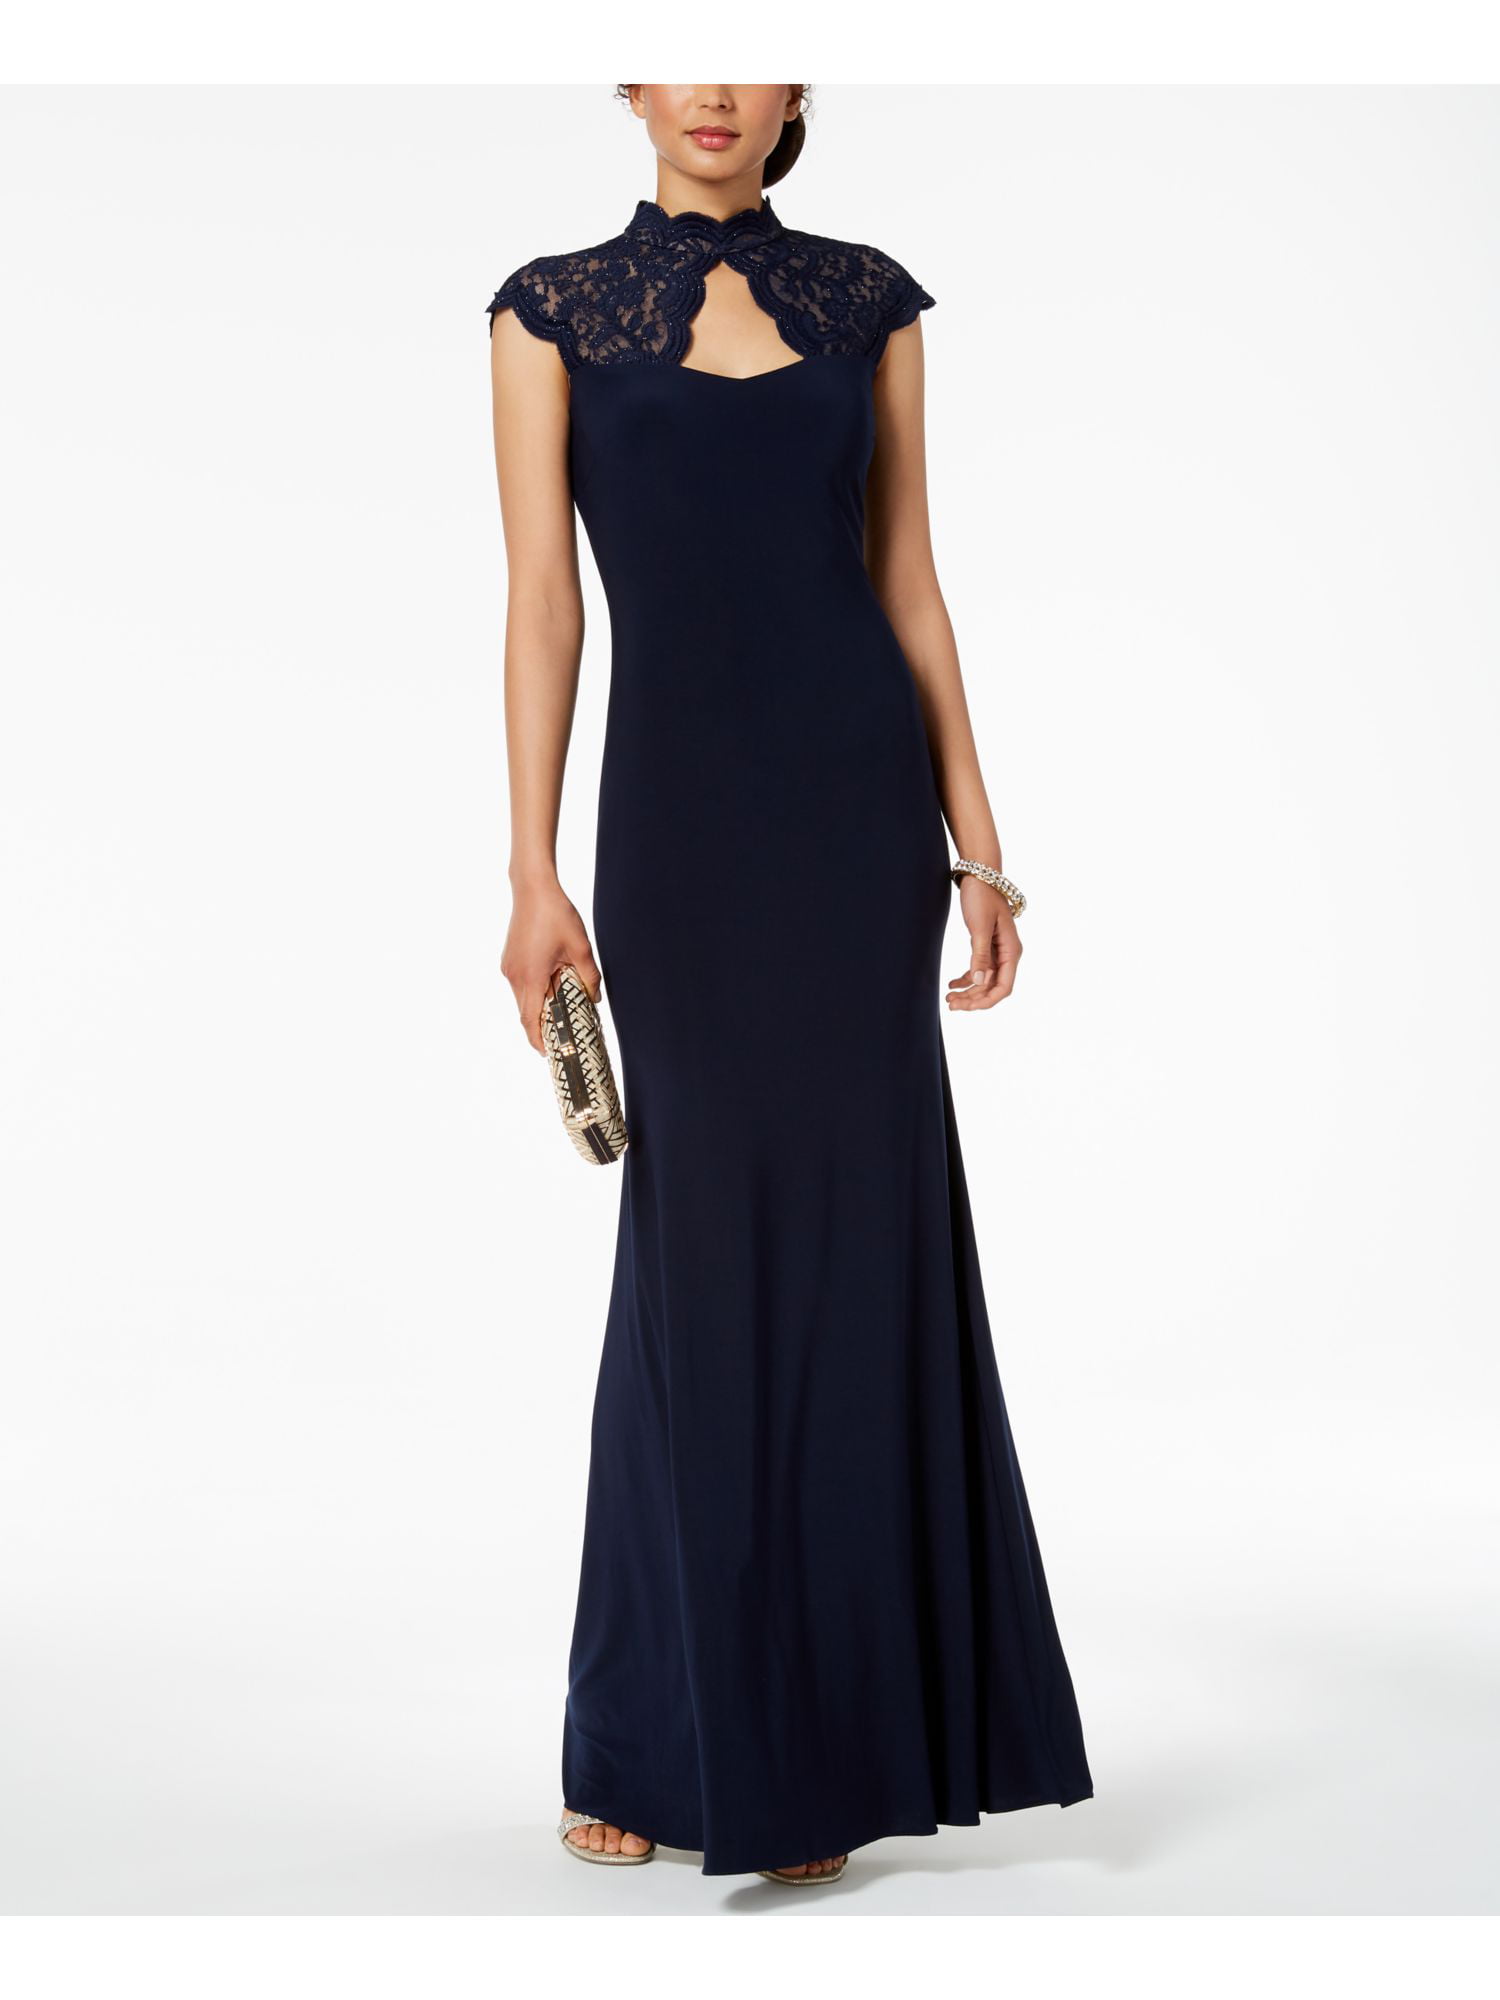 Betsy & Adam - BETSY & ADAM Womens Navy Glitter Lace Mock Neck Gown